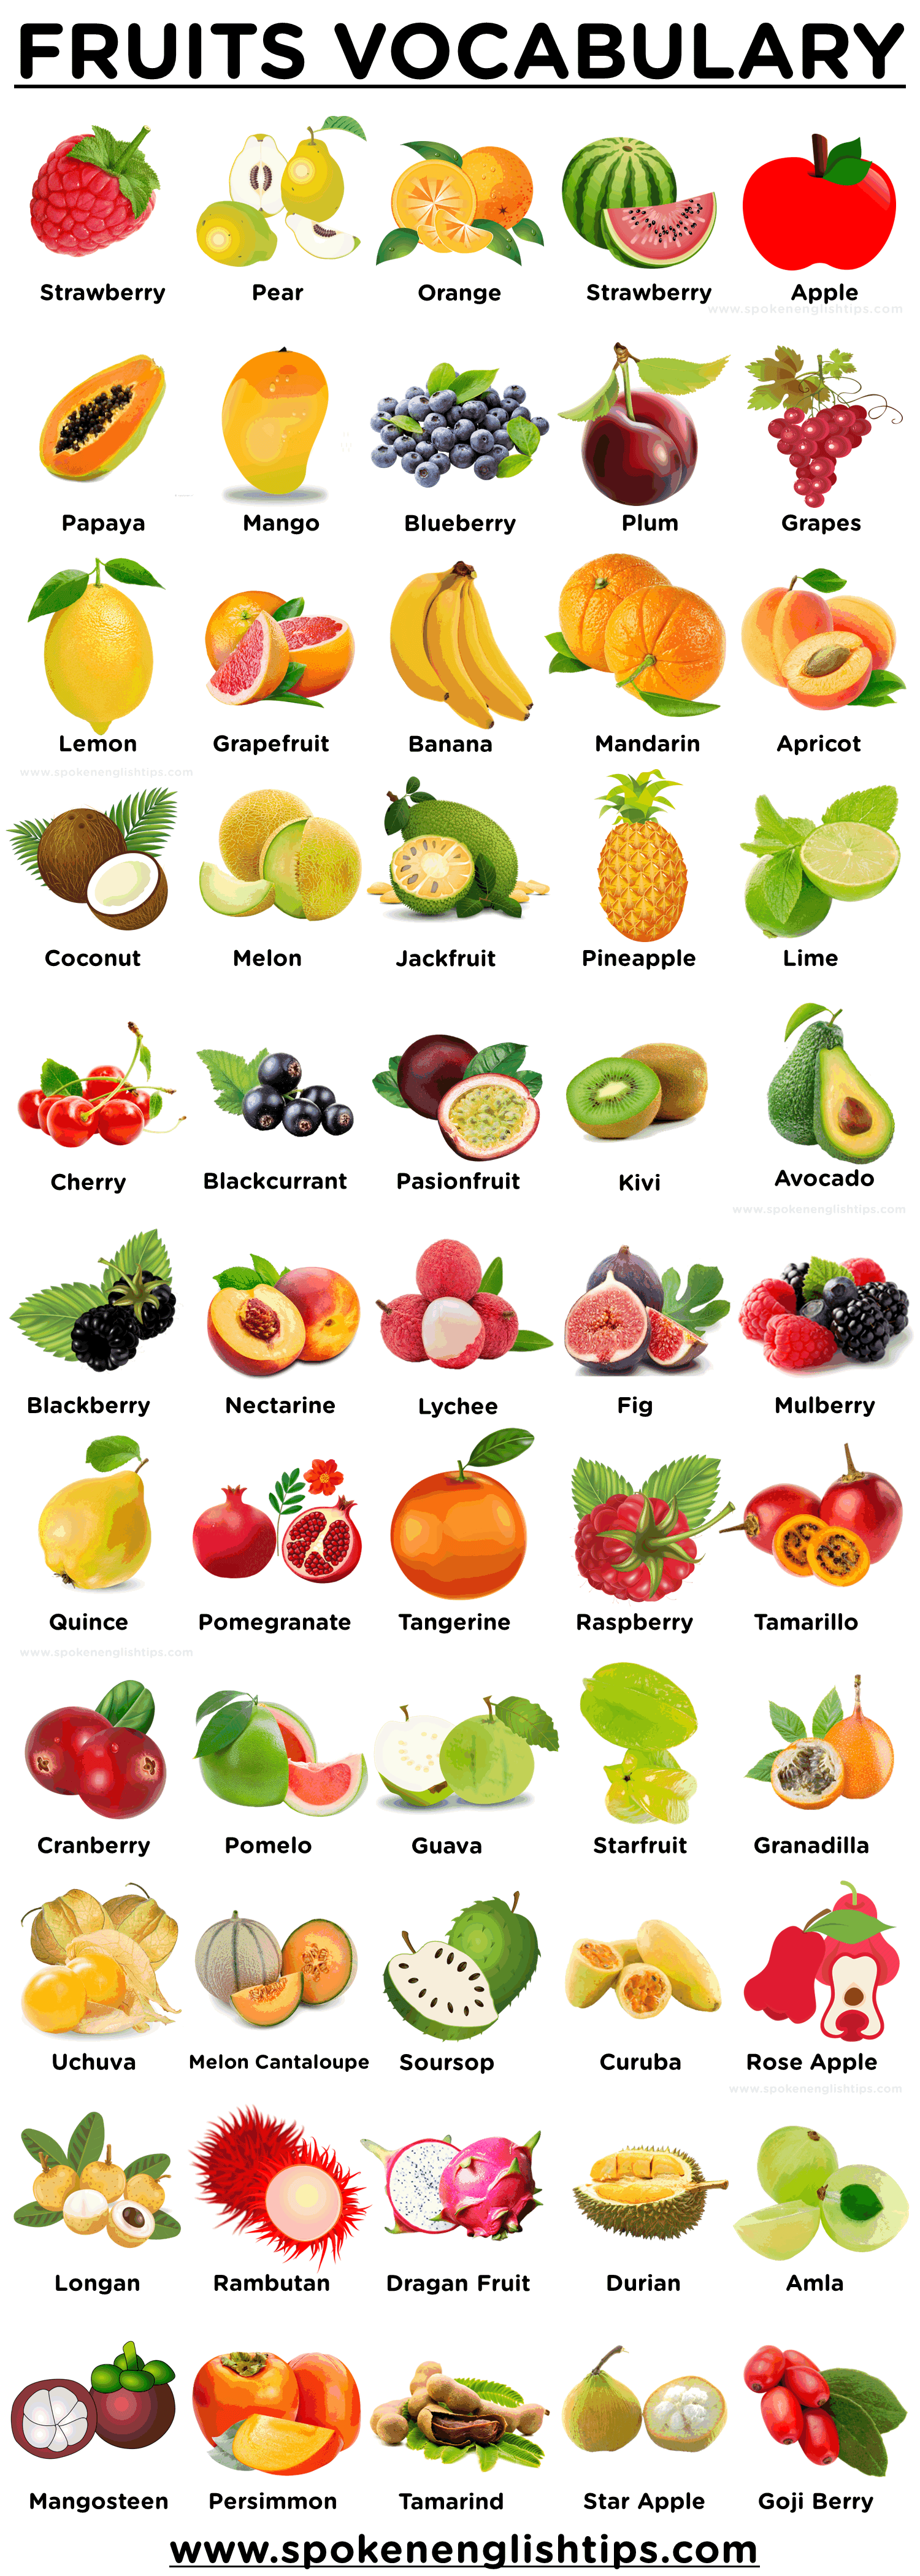 100 Fruits and Vegetables Name in English